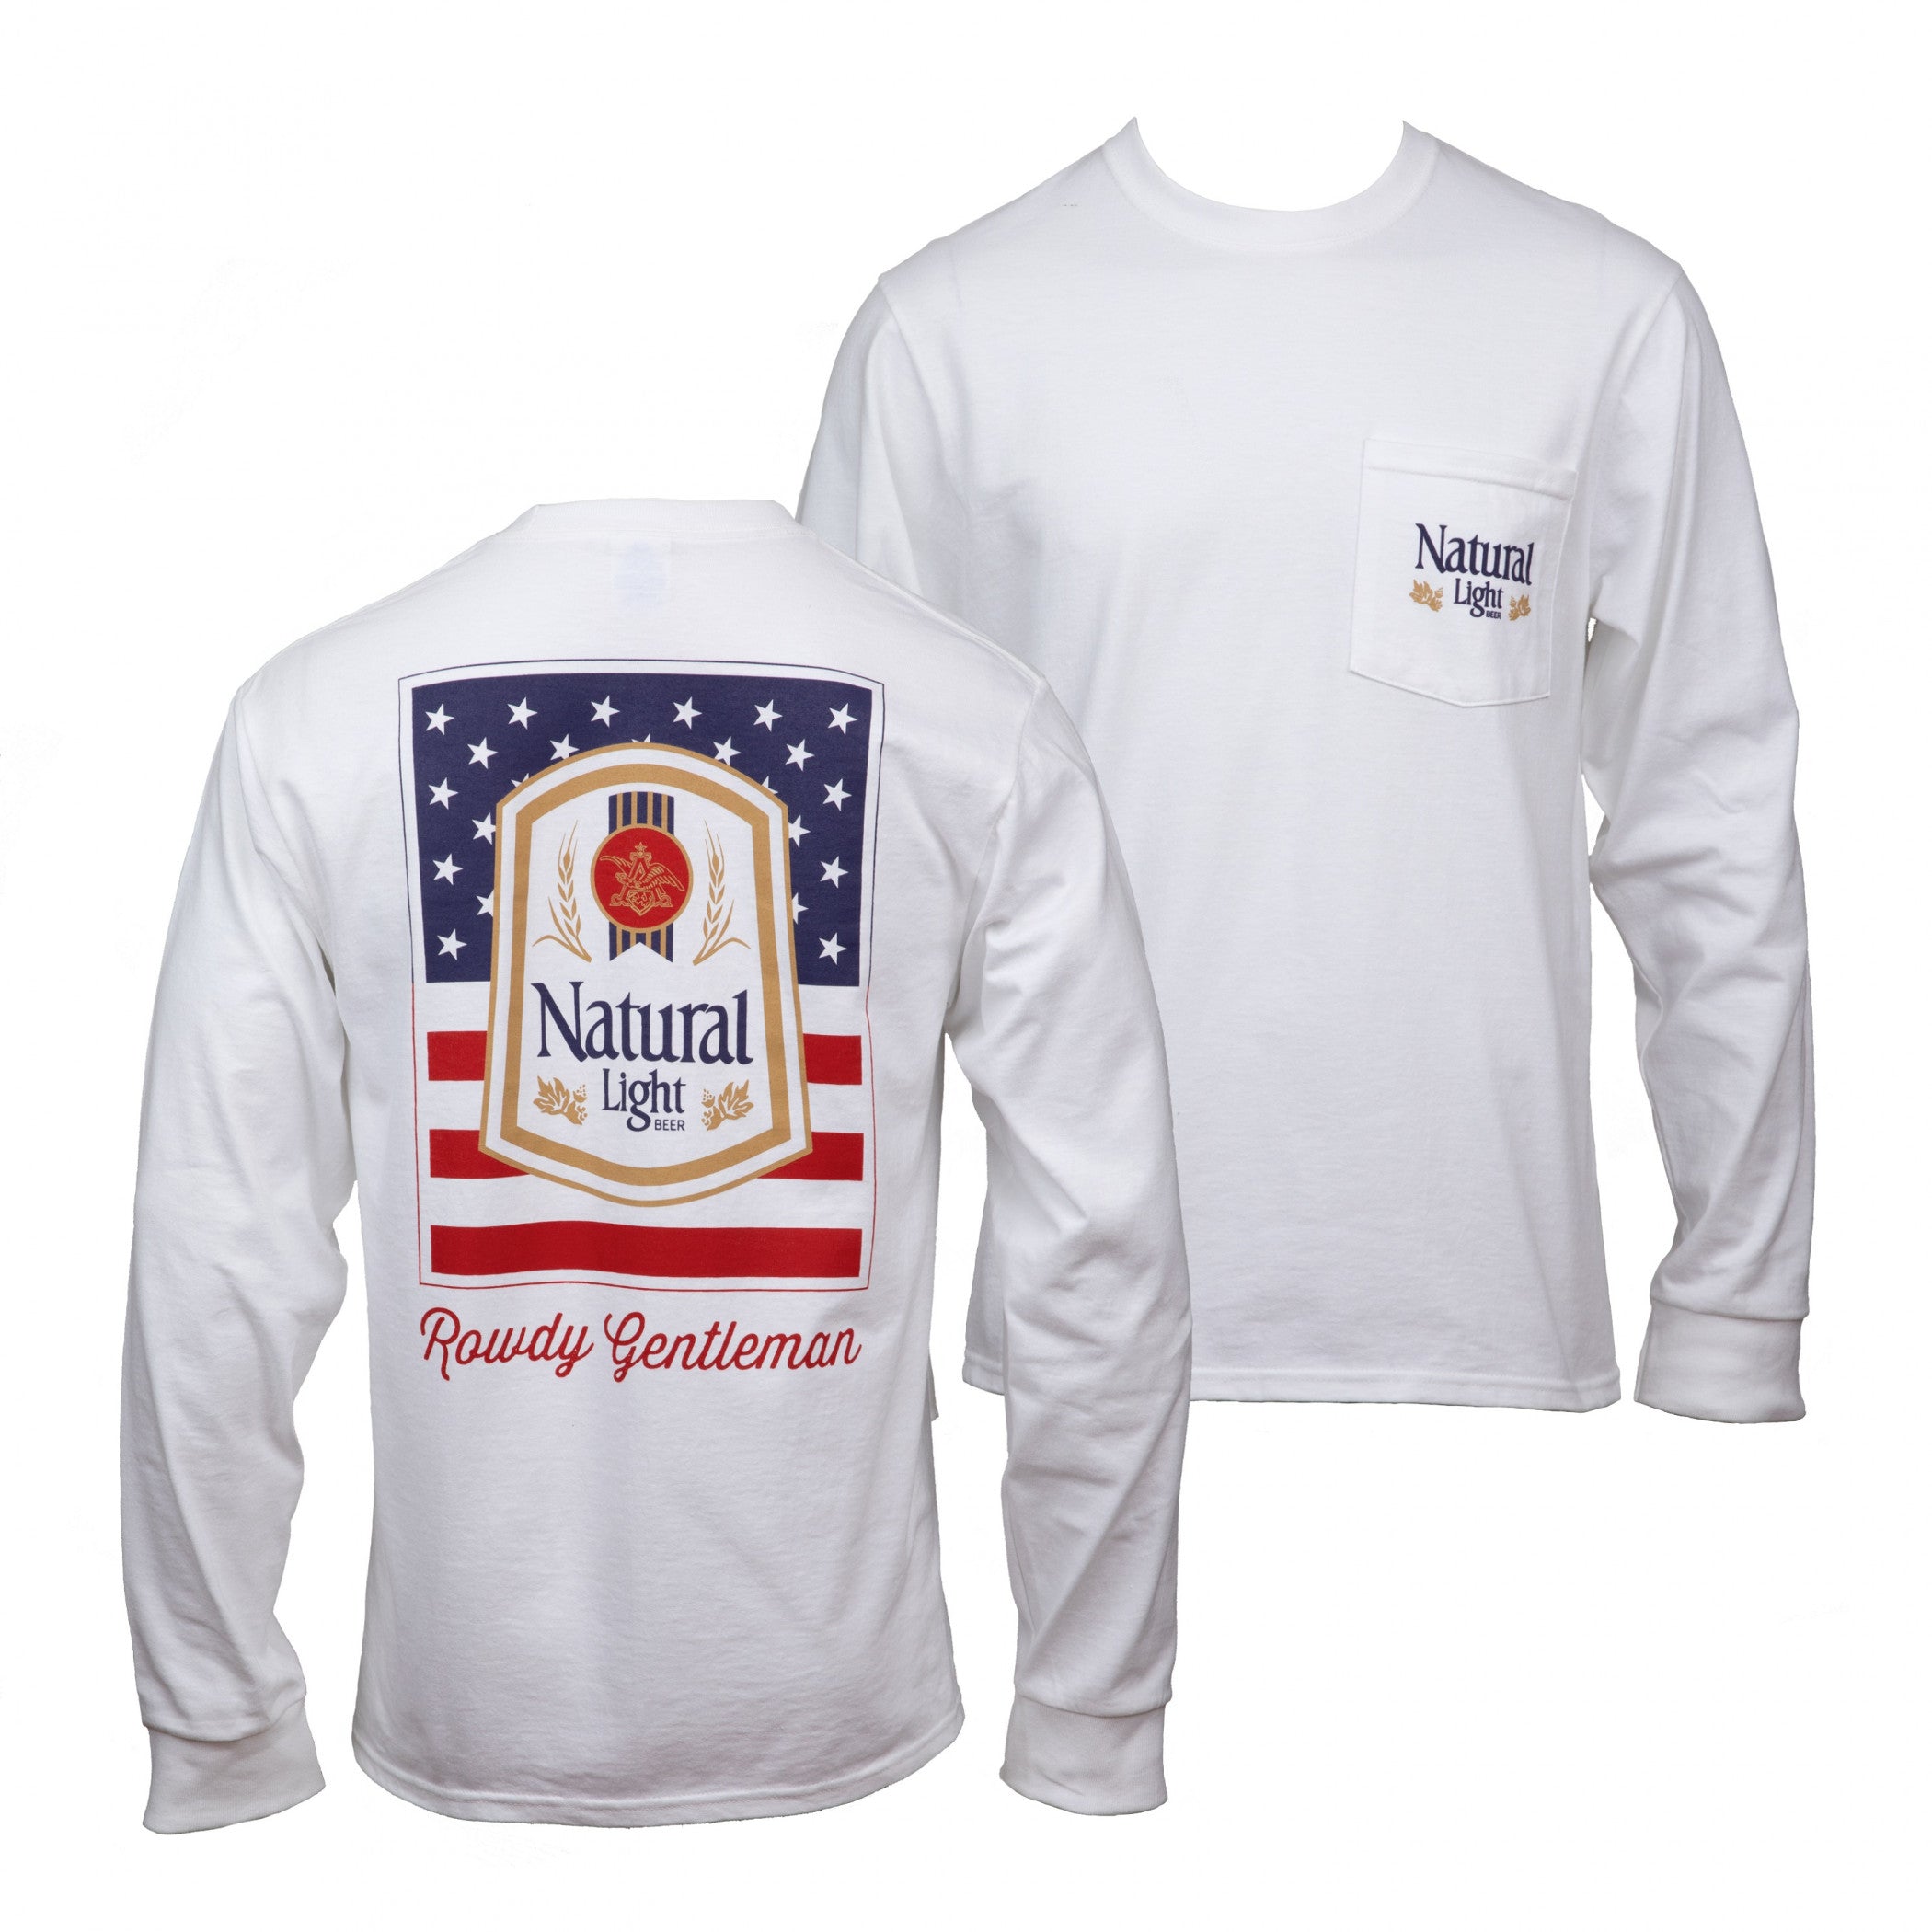 title:Natural Light Americana Front and Back Print Long Sleeve Shirt;color:White